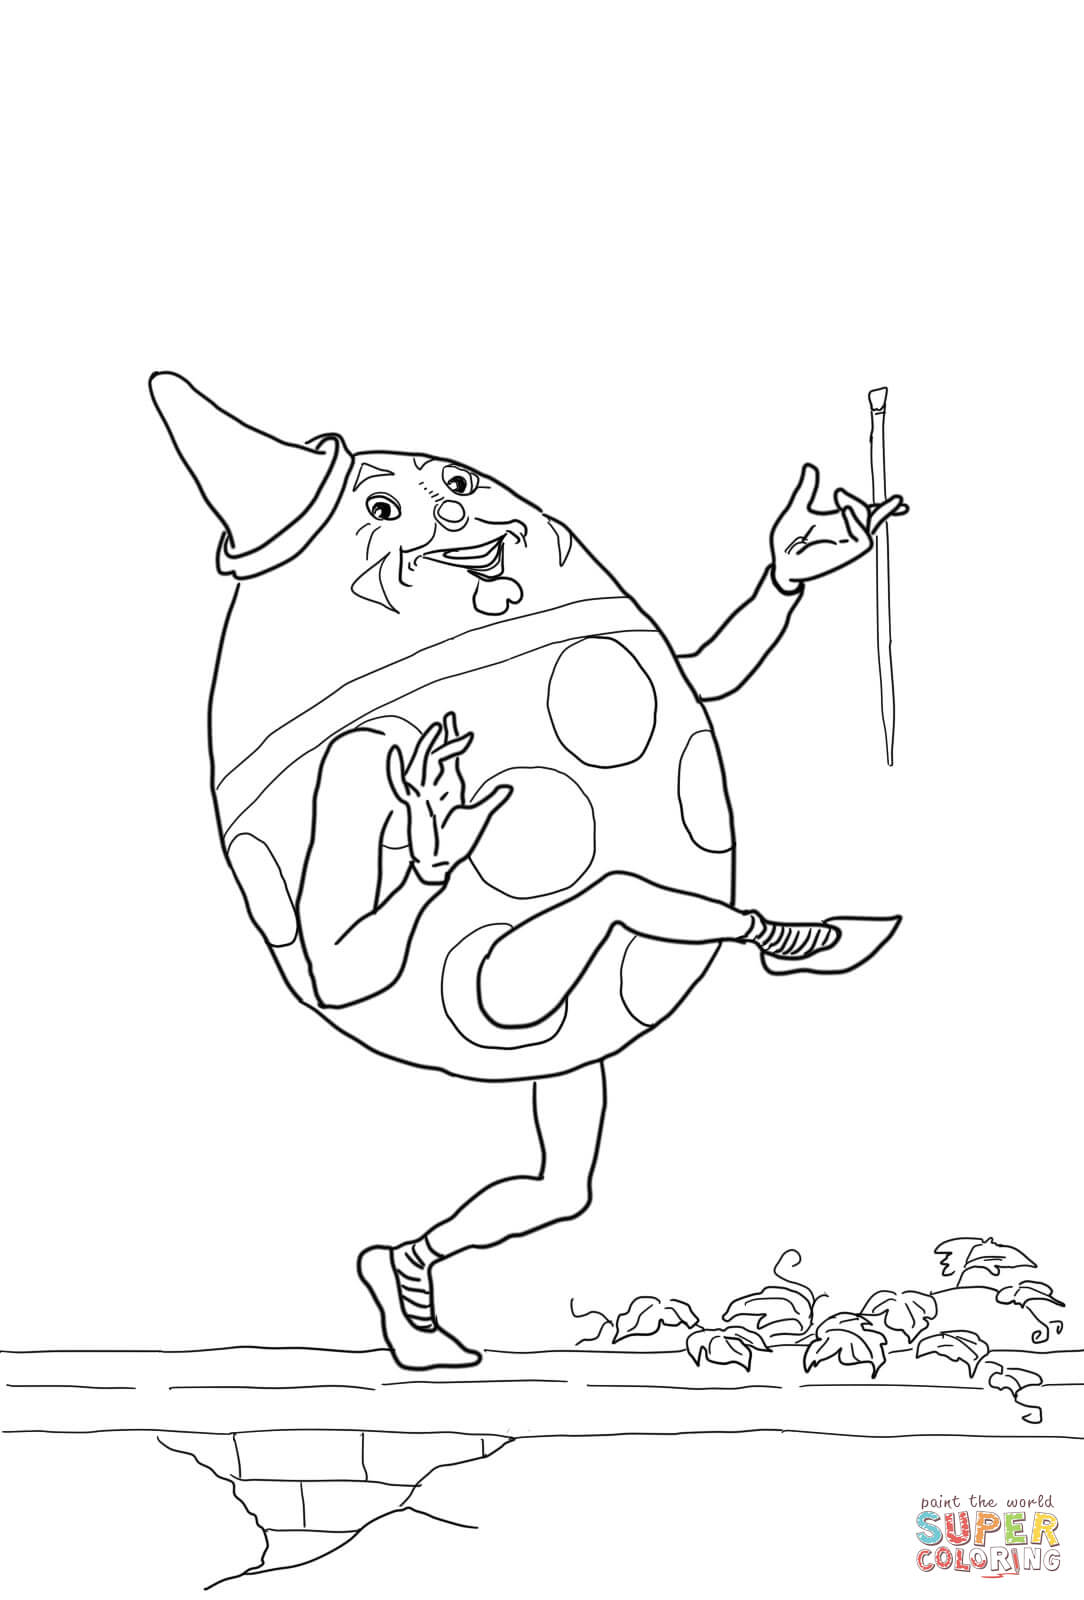 humpty-dumpty-coloring-page-0020-q1